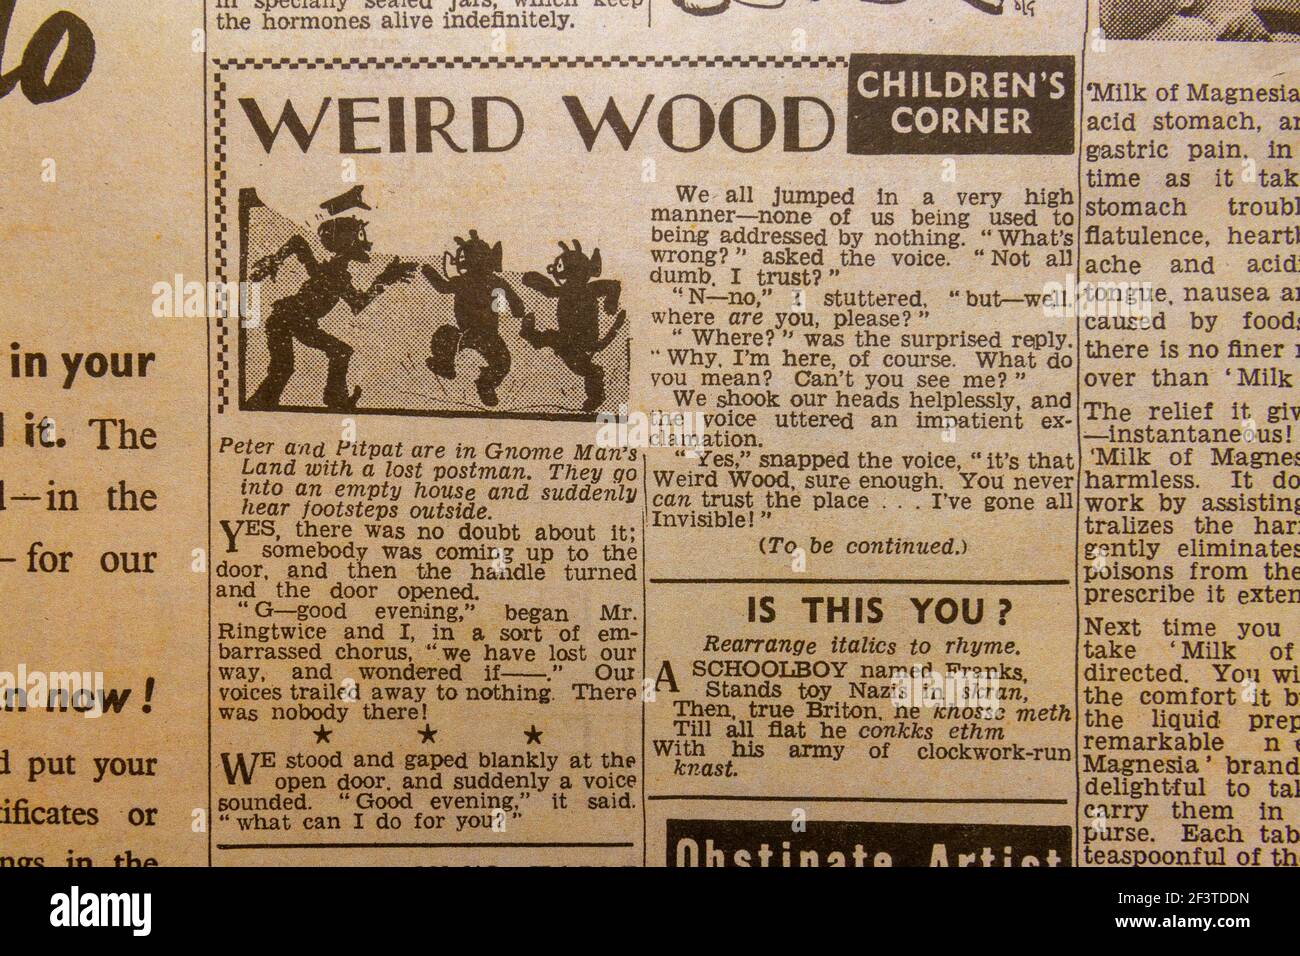 Weird Wood (children's corner) in the Daily Sketch newspaper (replica), 19th June 1940 (during Battle of Britain). Stock Photo